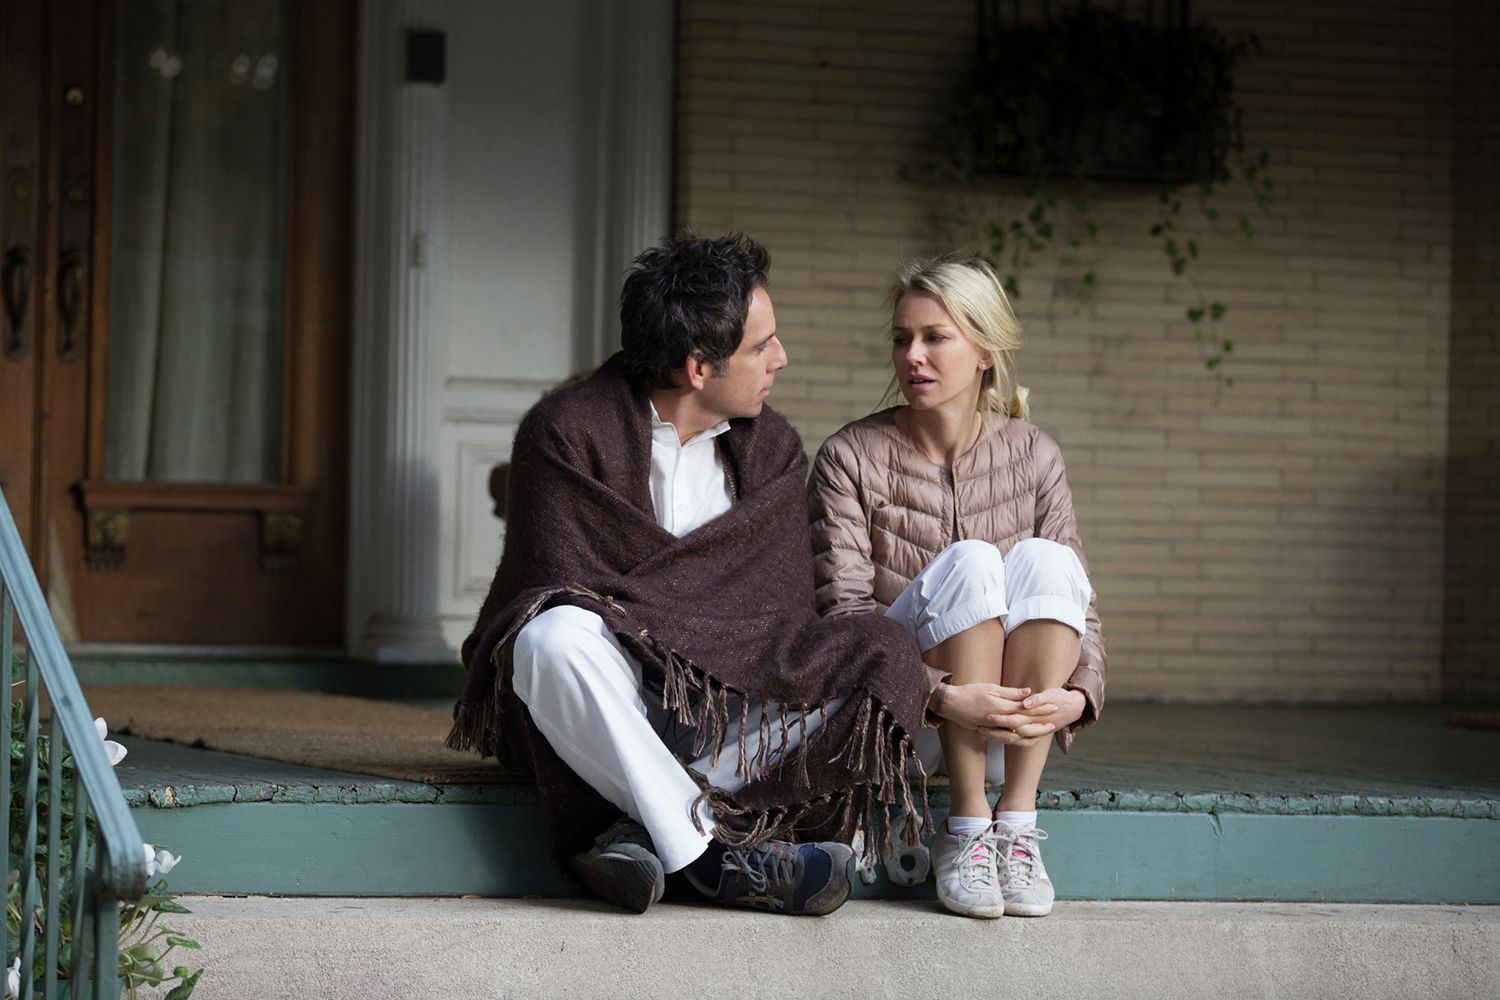 Ben Stiller and Naomi Watts Star in &#039;While We&#039;re Young&#039;